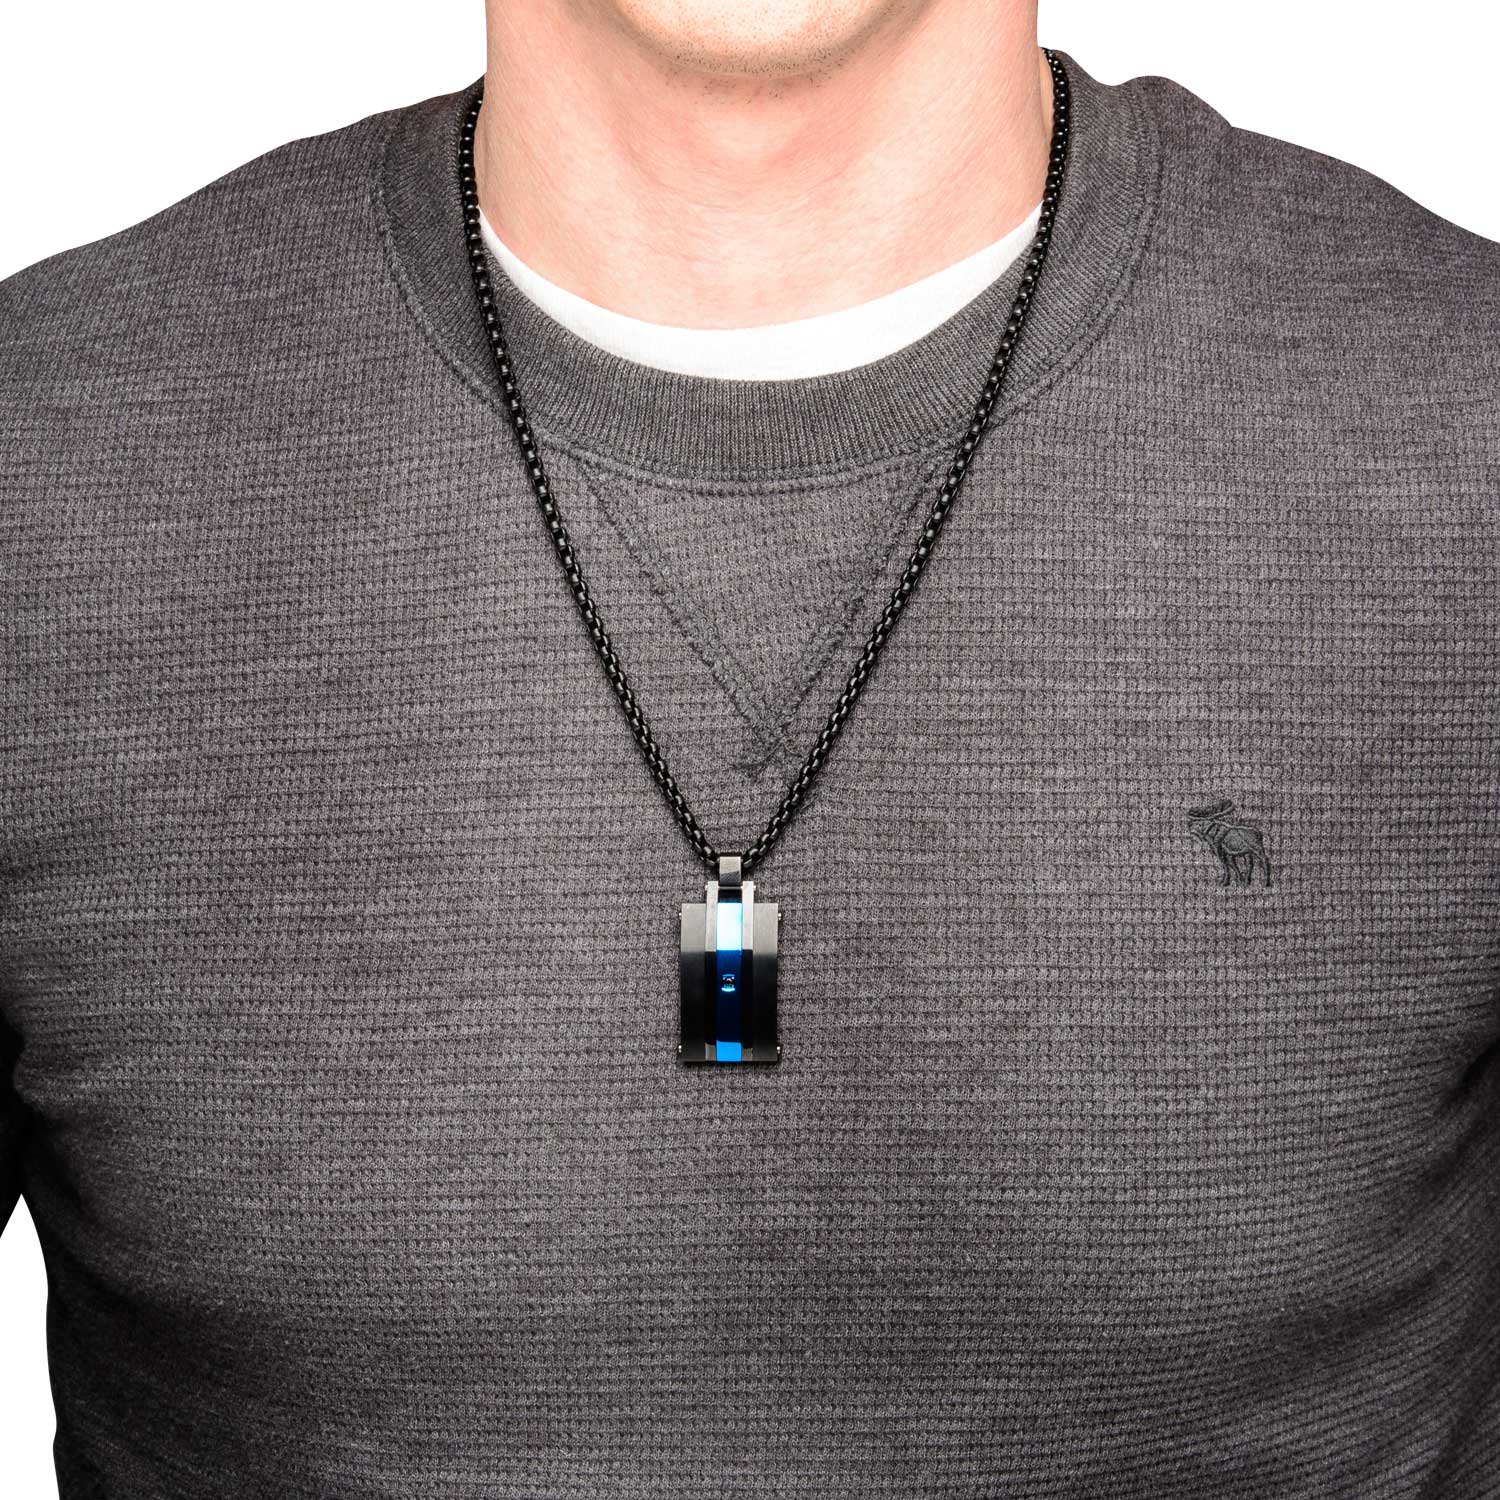 Matte Finished Black & Blue Plated with Black CZ Pendant with Chain Image 4 K. Martin Jeweler Dodge City, KS